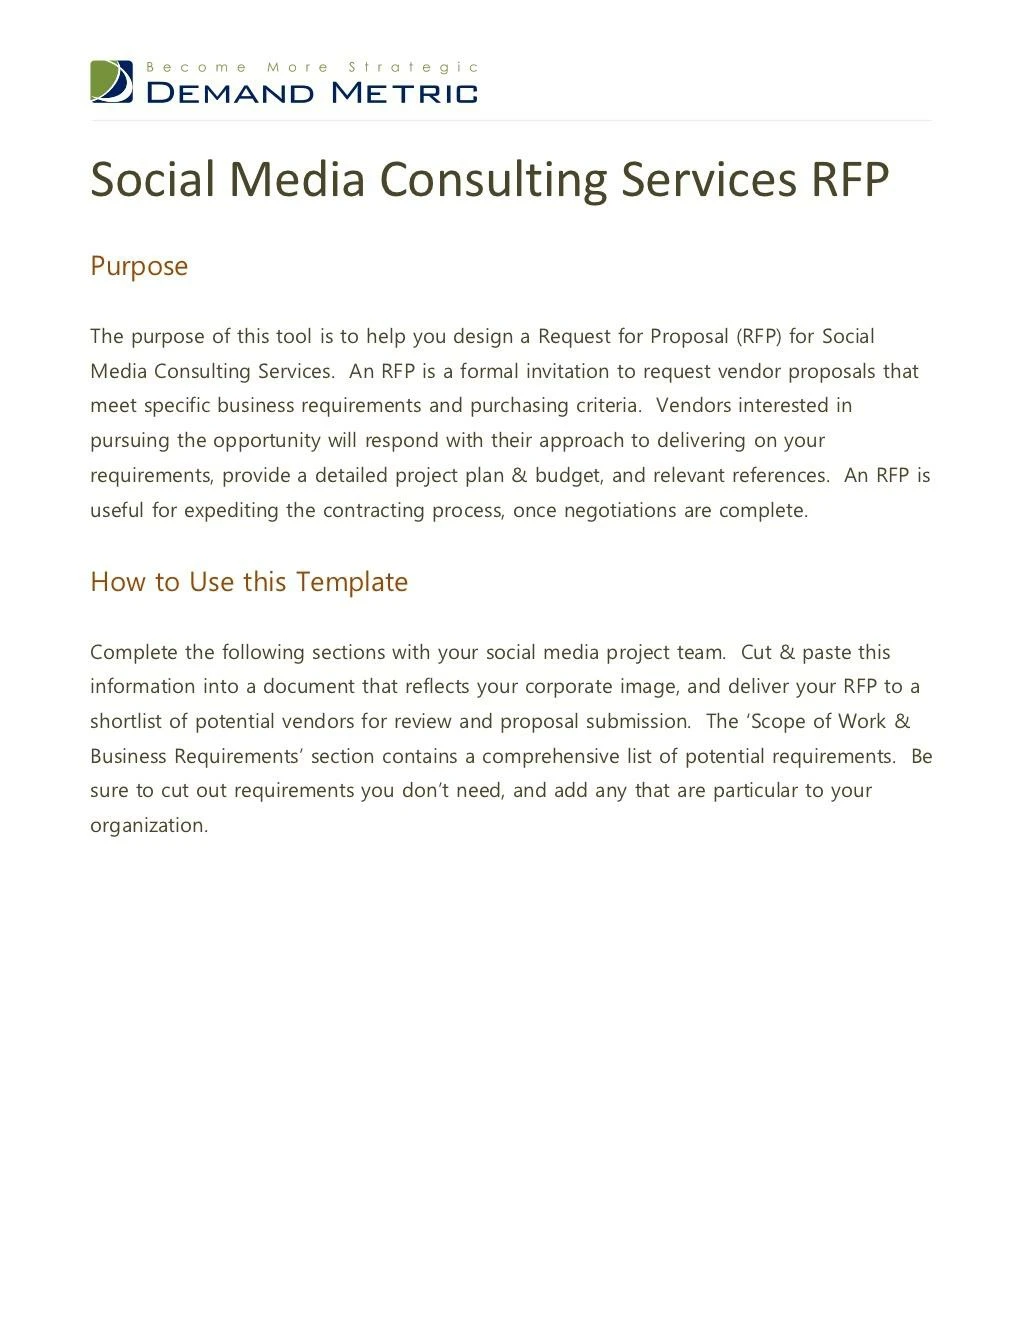 social media consulting services rfp